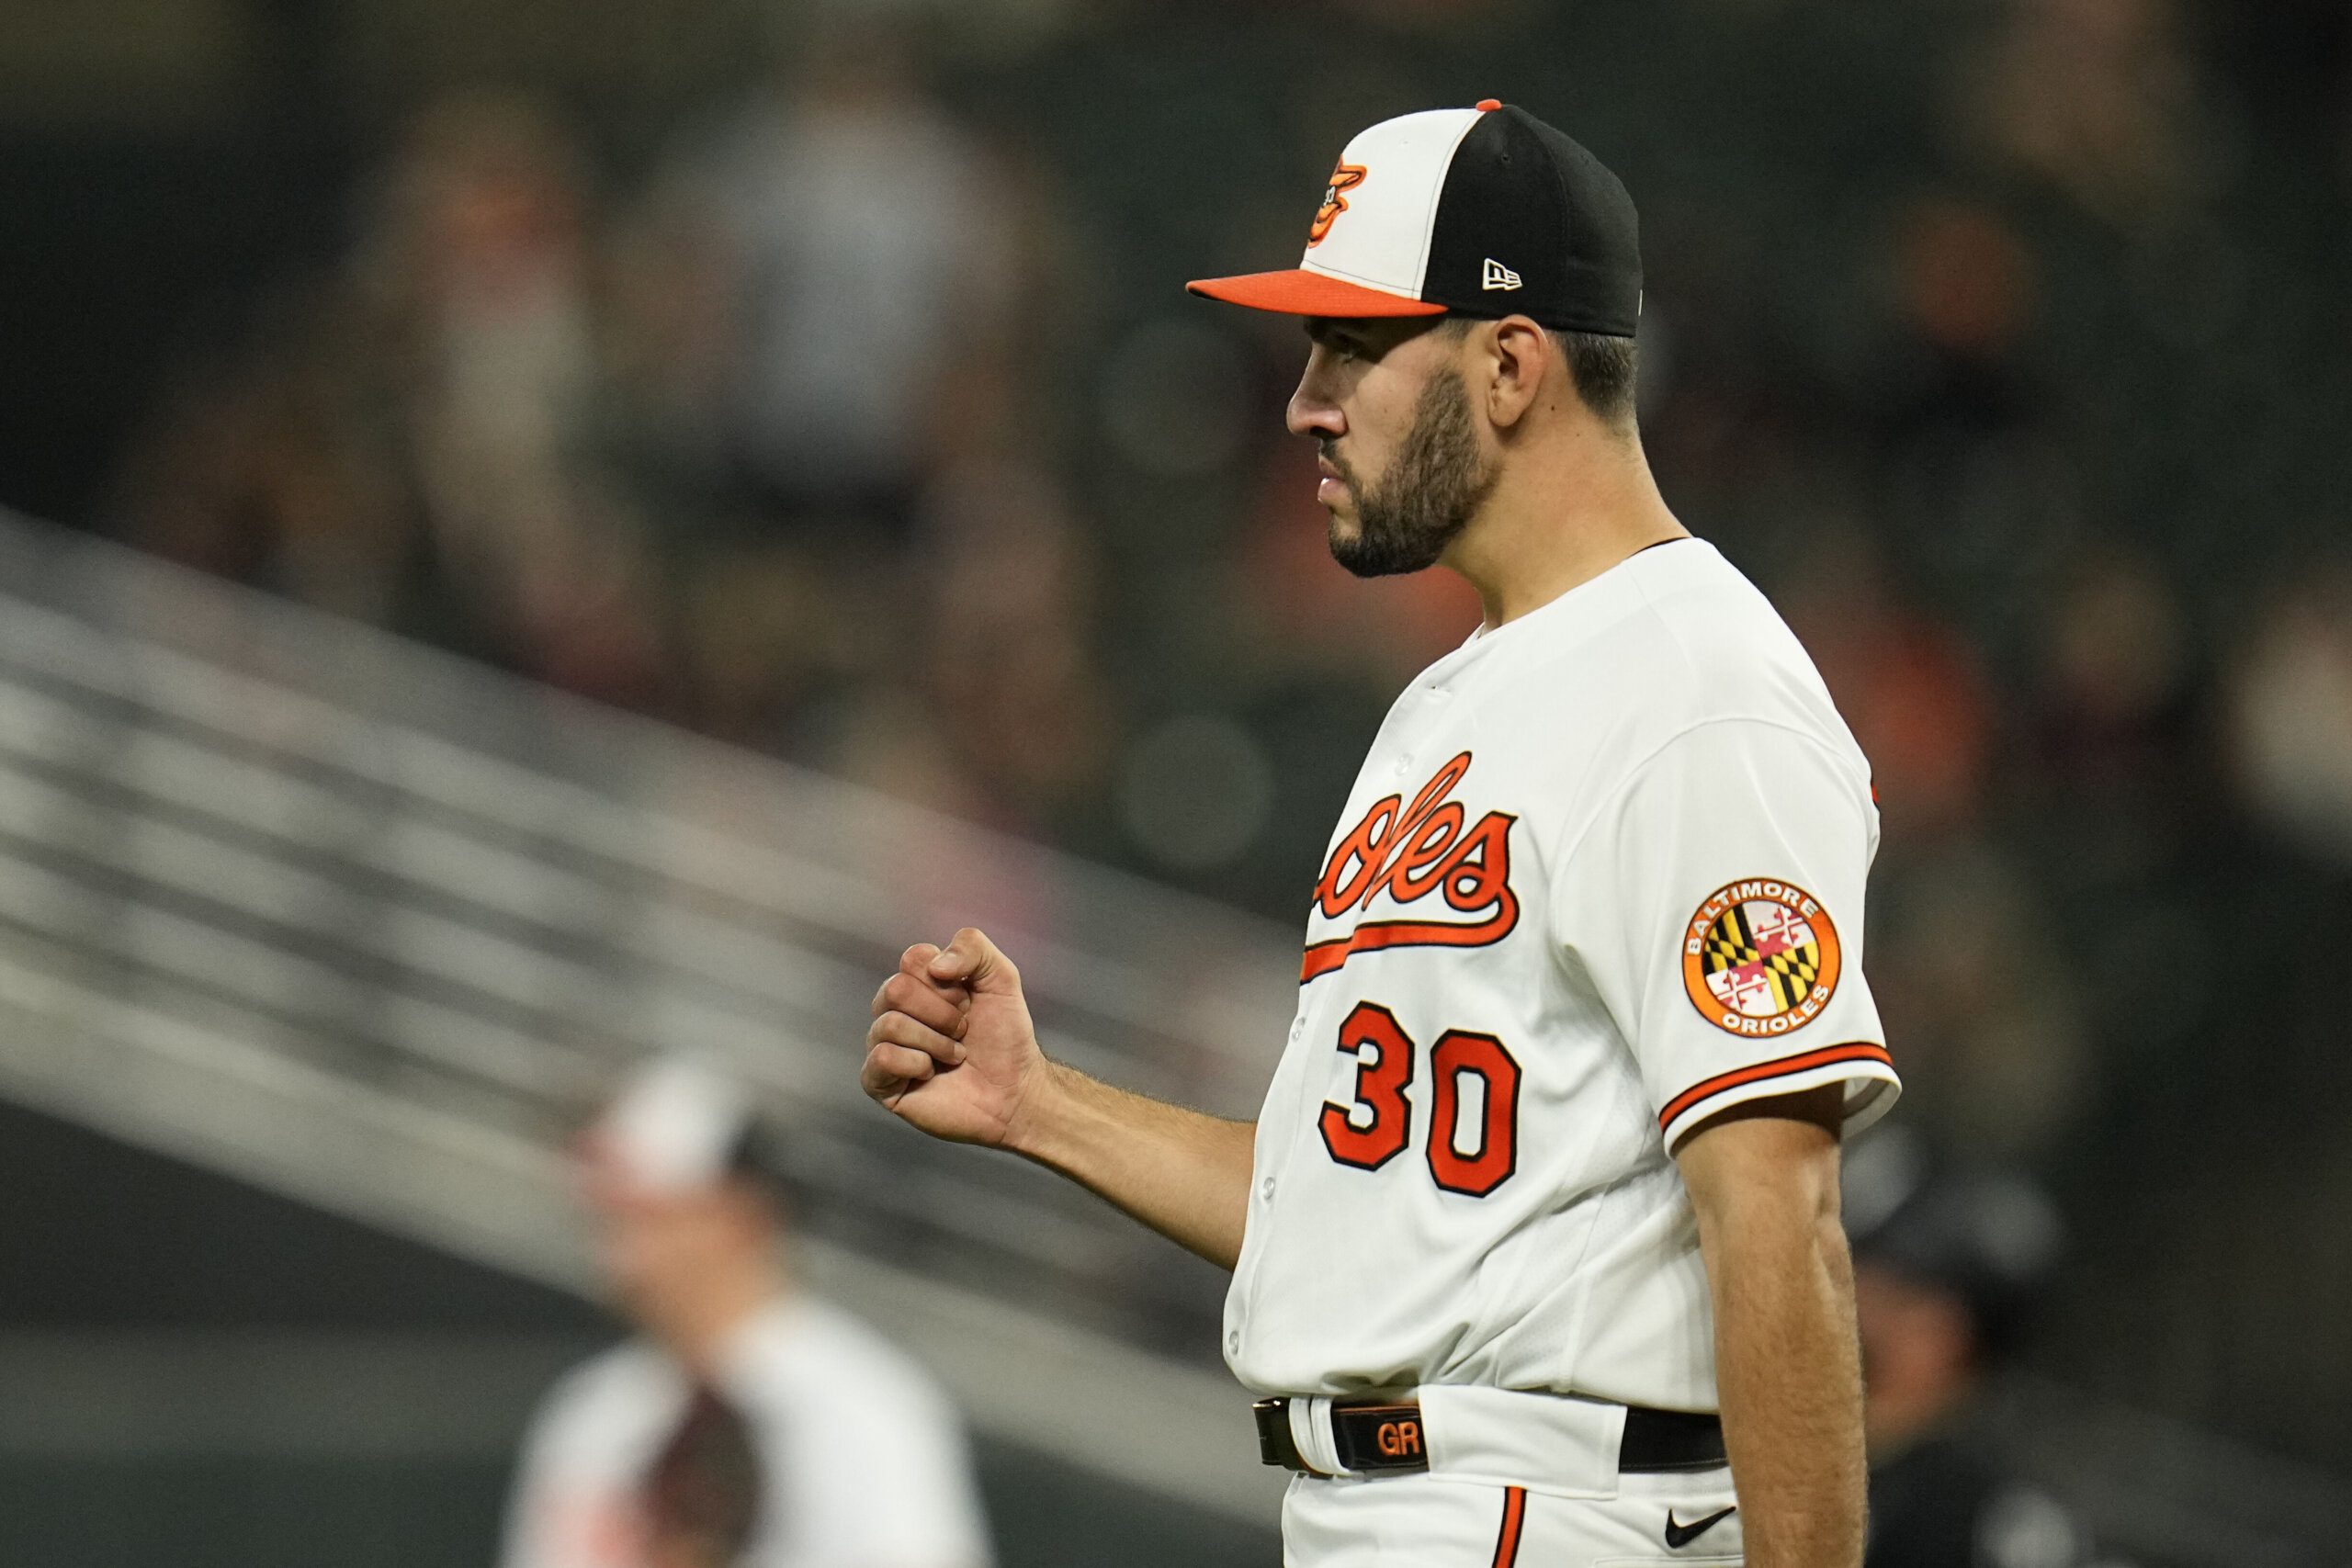 Orioles rookie Grayson Rodriguez is experiencing some growing